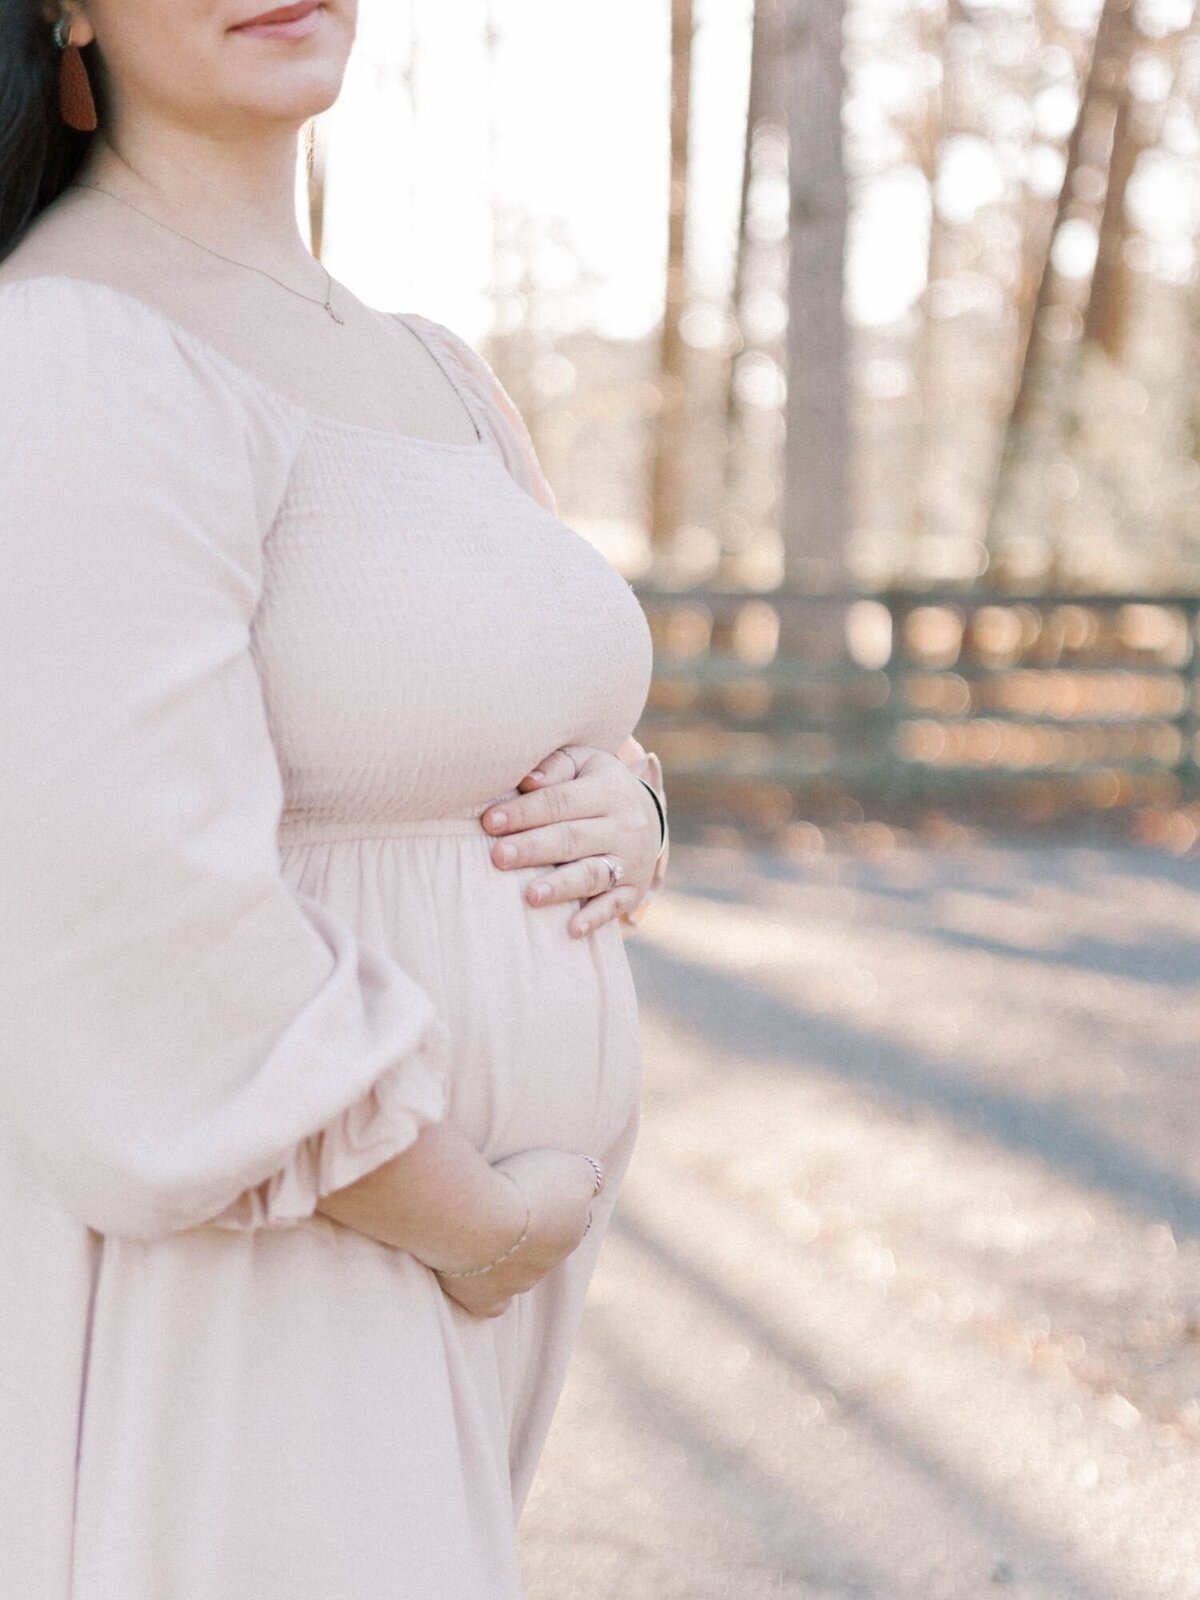 Woman holds her pregnant belly.